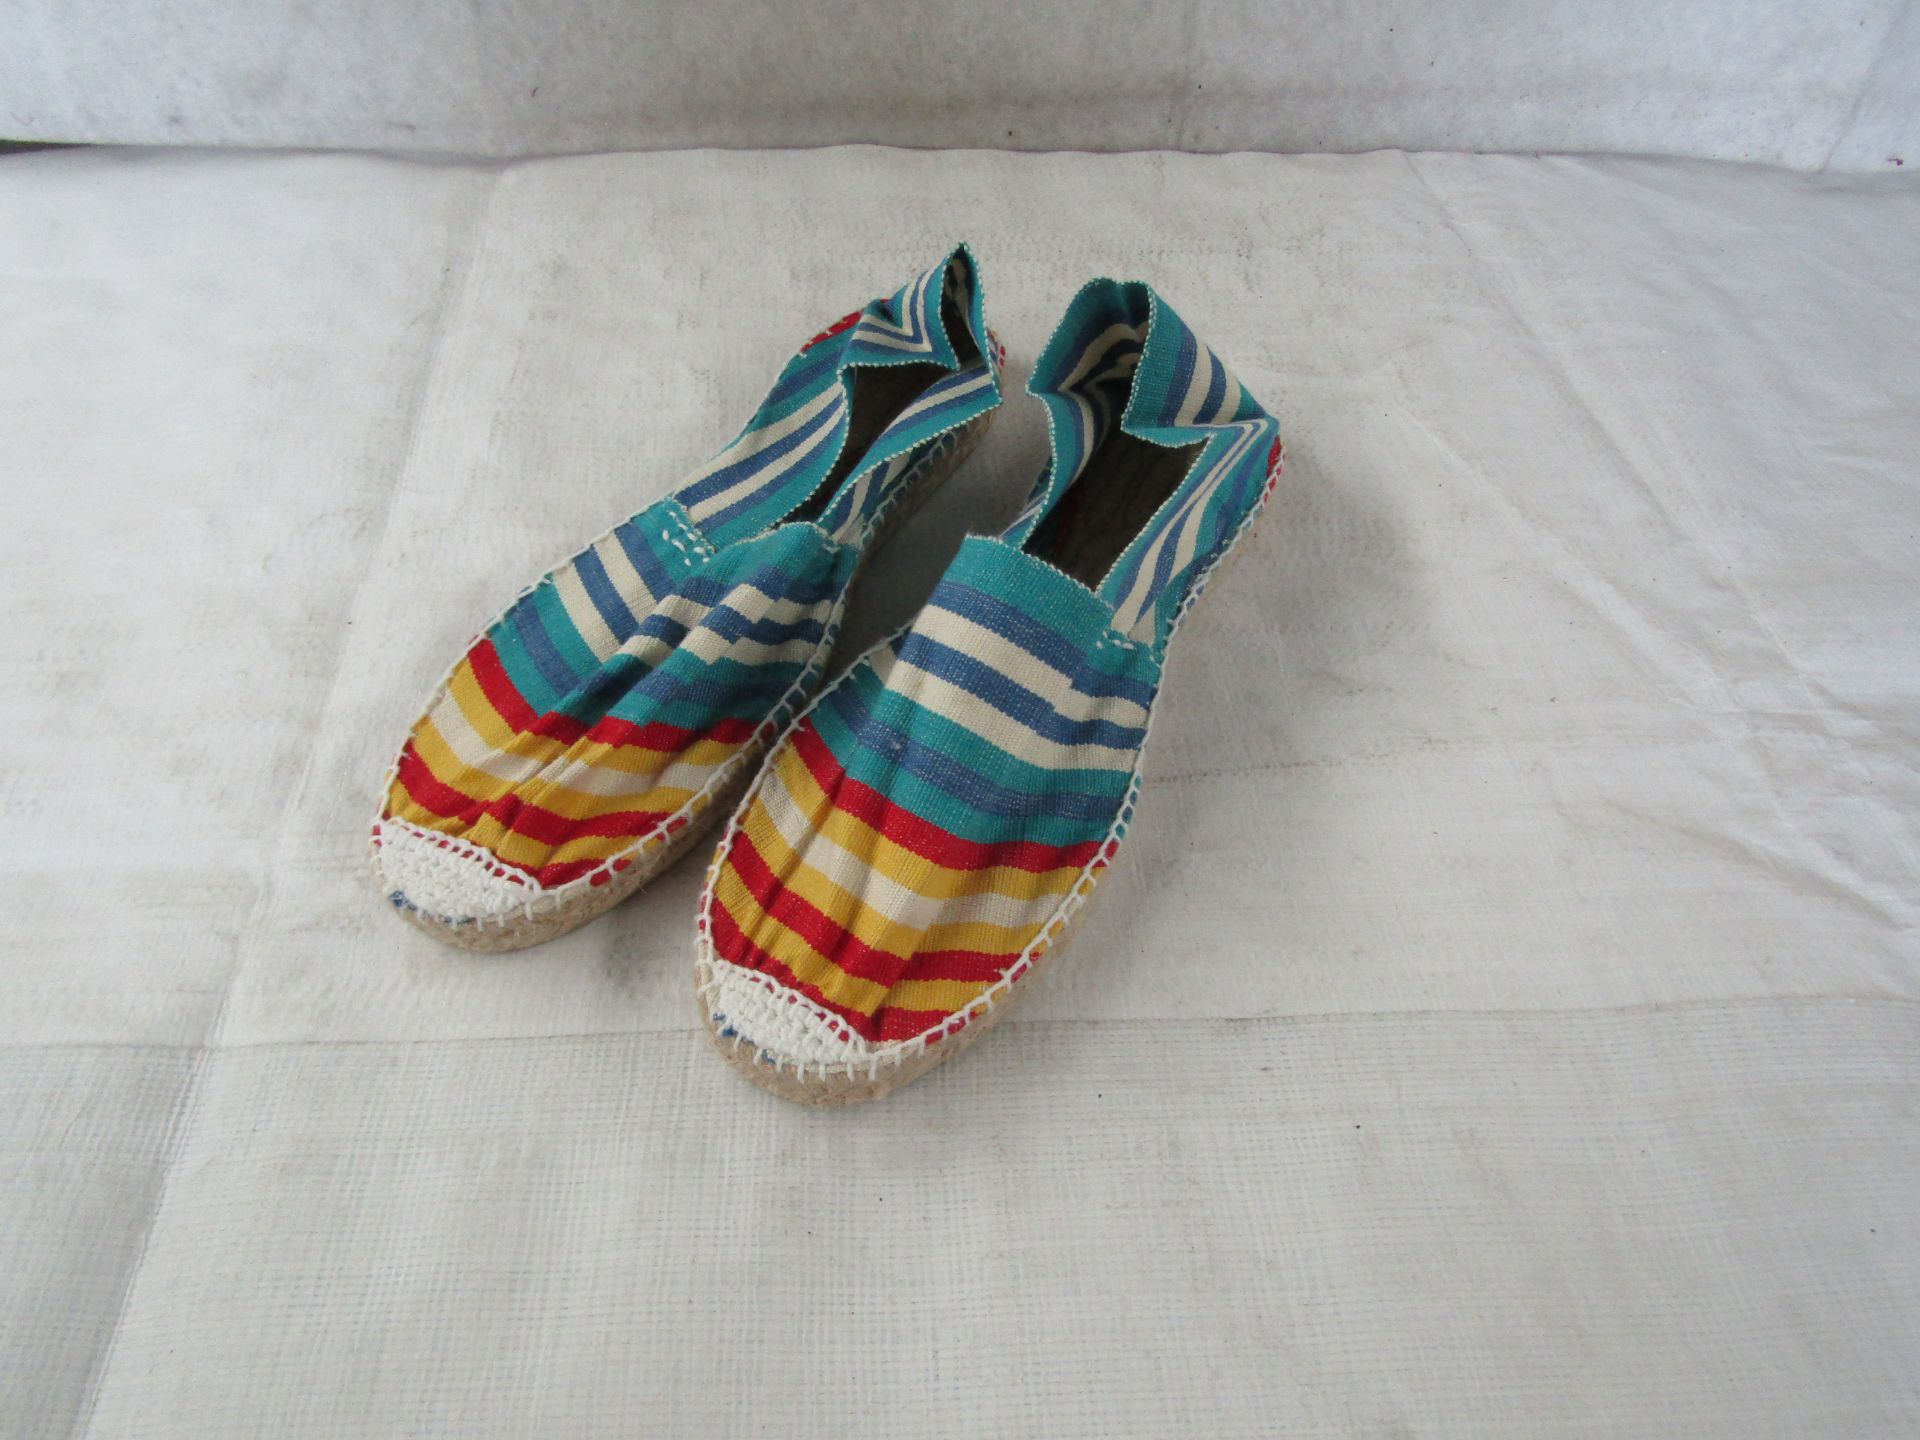 TheStripeCompany - Slip-On Espadrilles Shoes - See Image For Design - Size 40 - New.